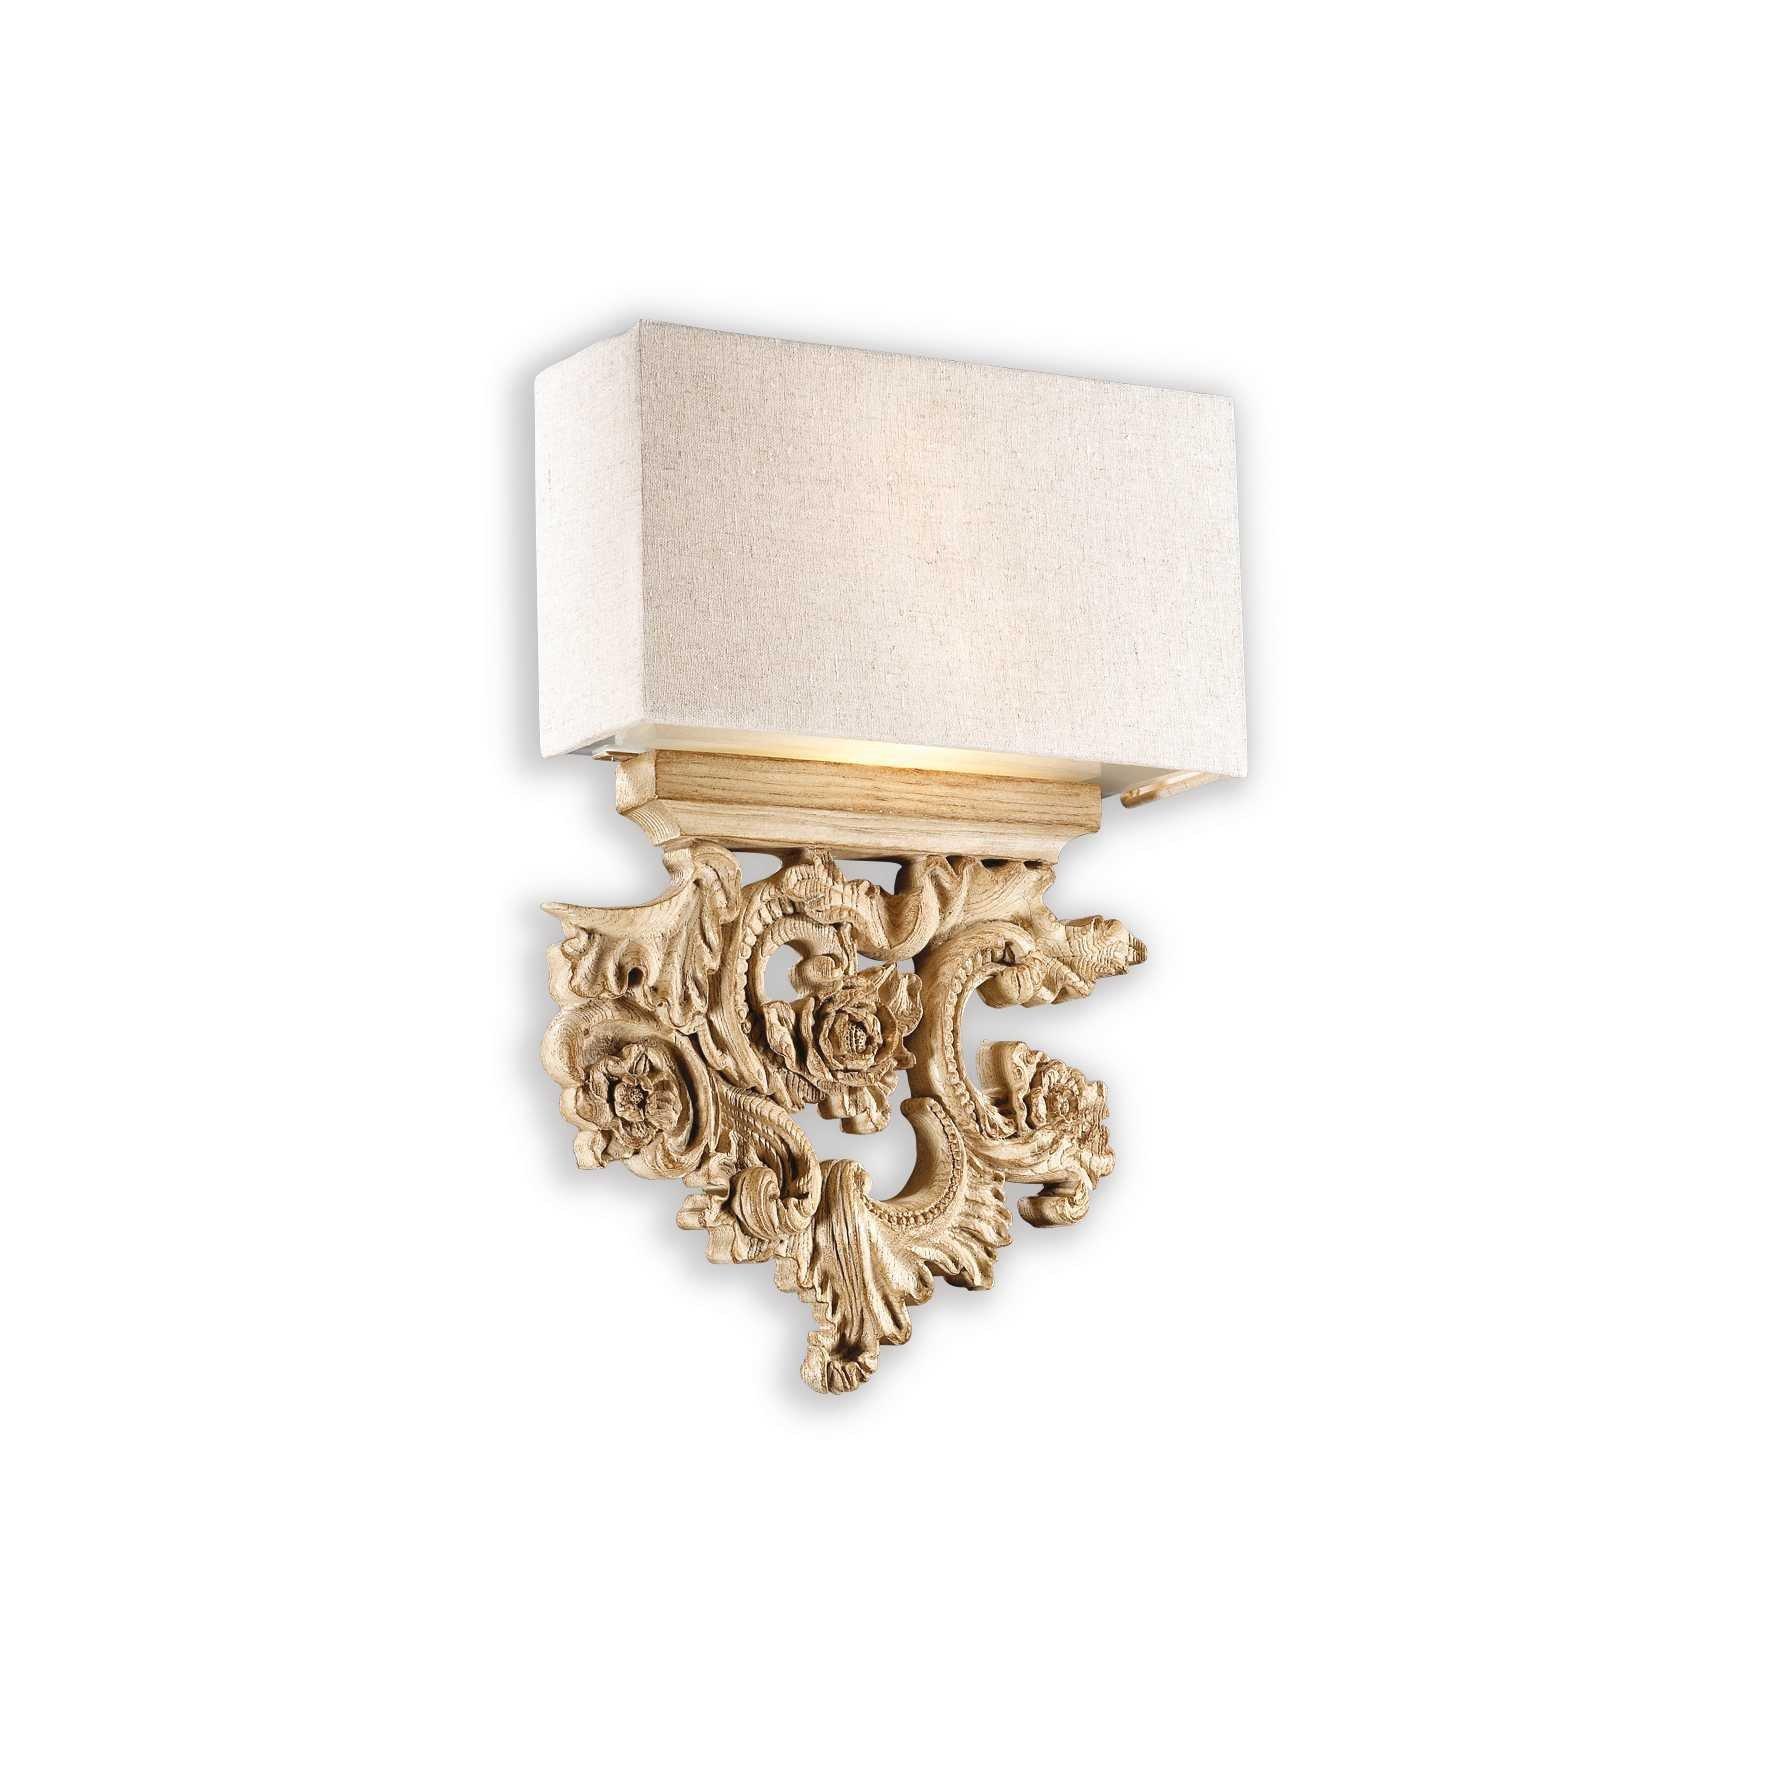 Peter 2 Light Indoor Wall Light Brown Beige with Shade E14